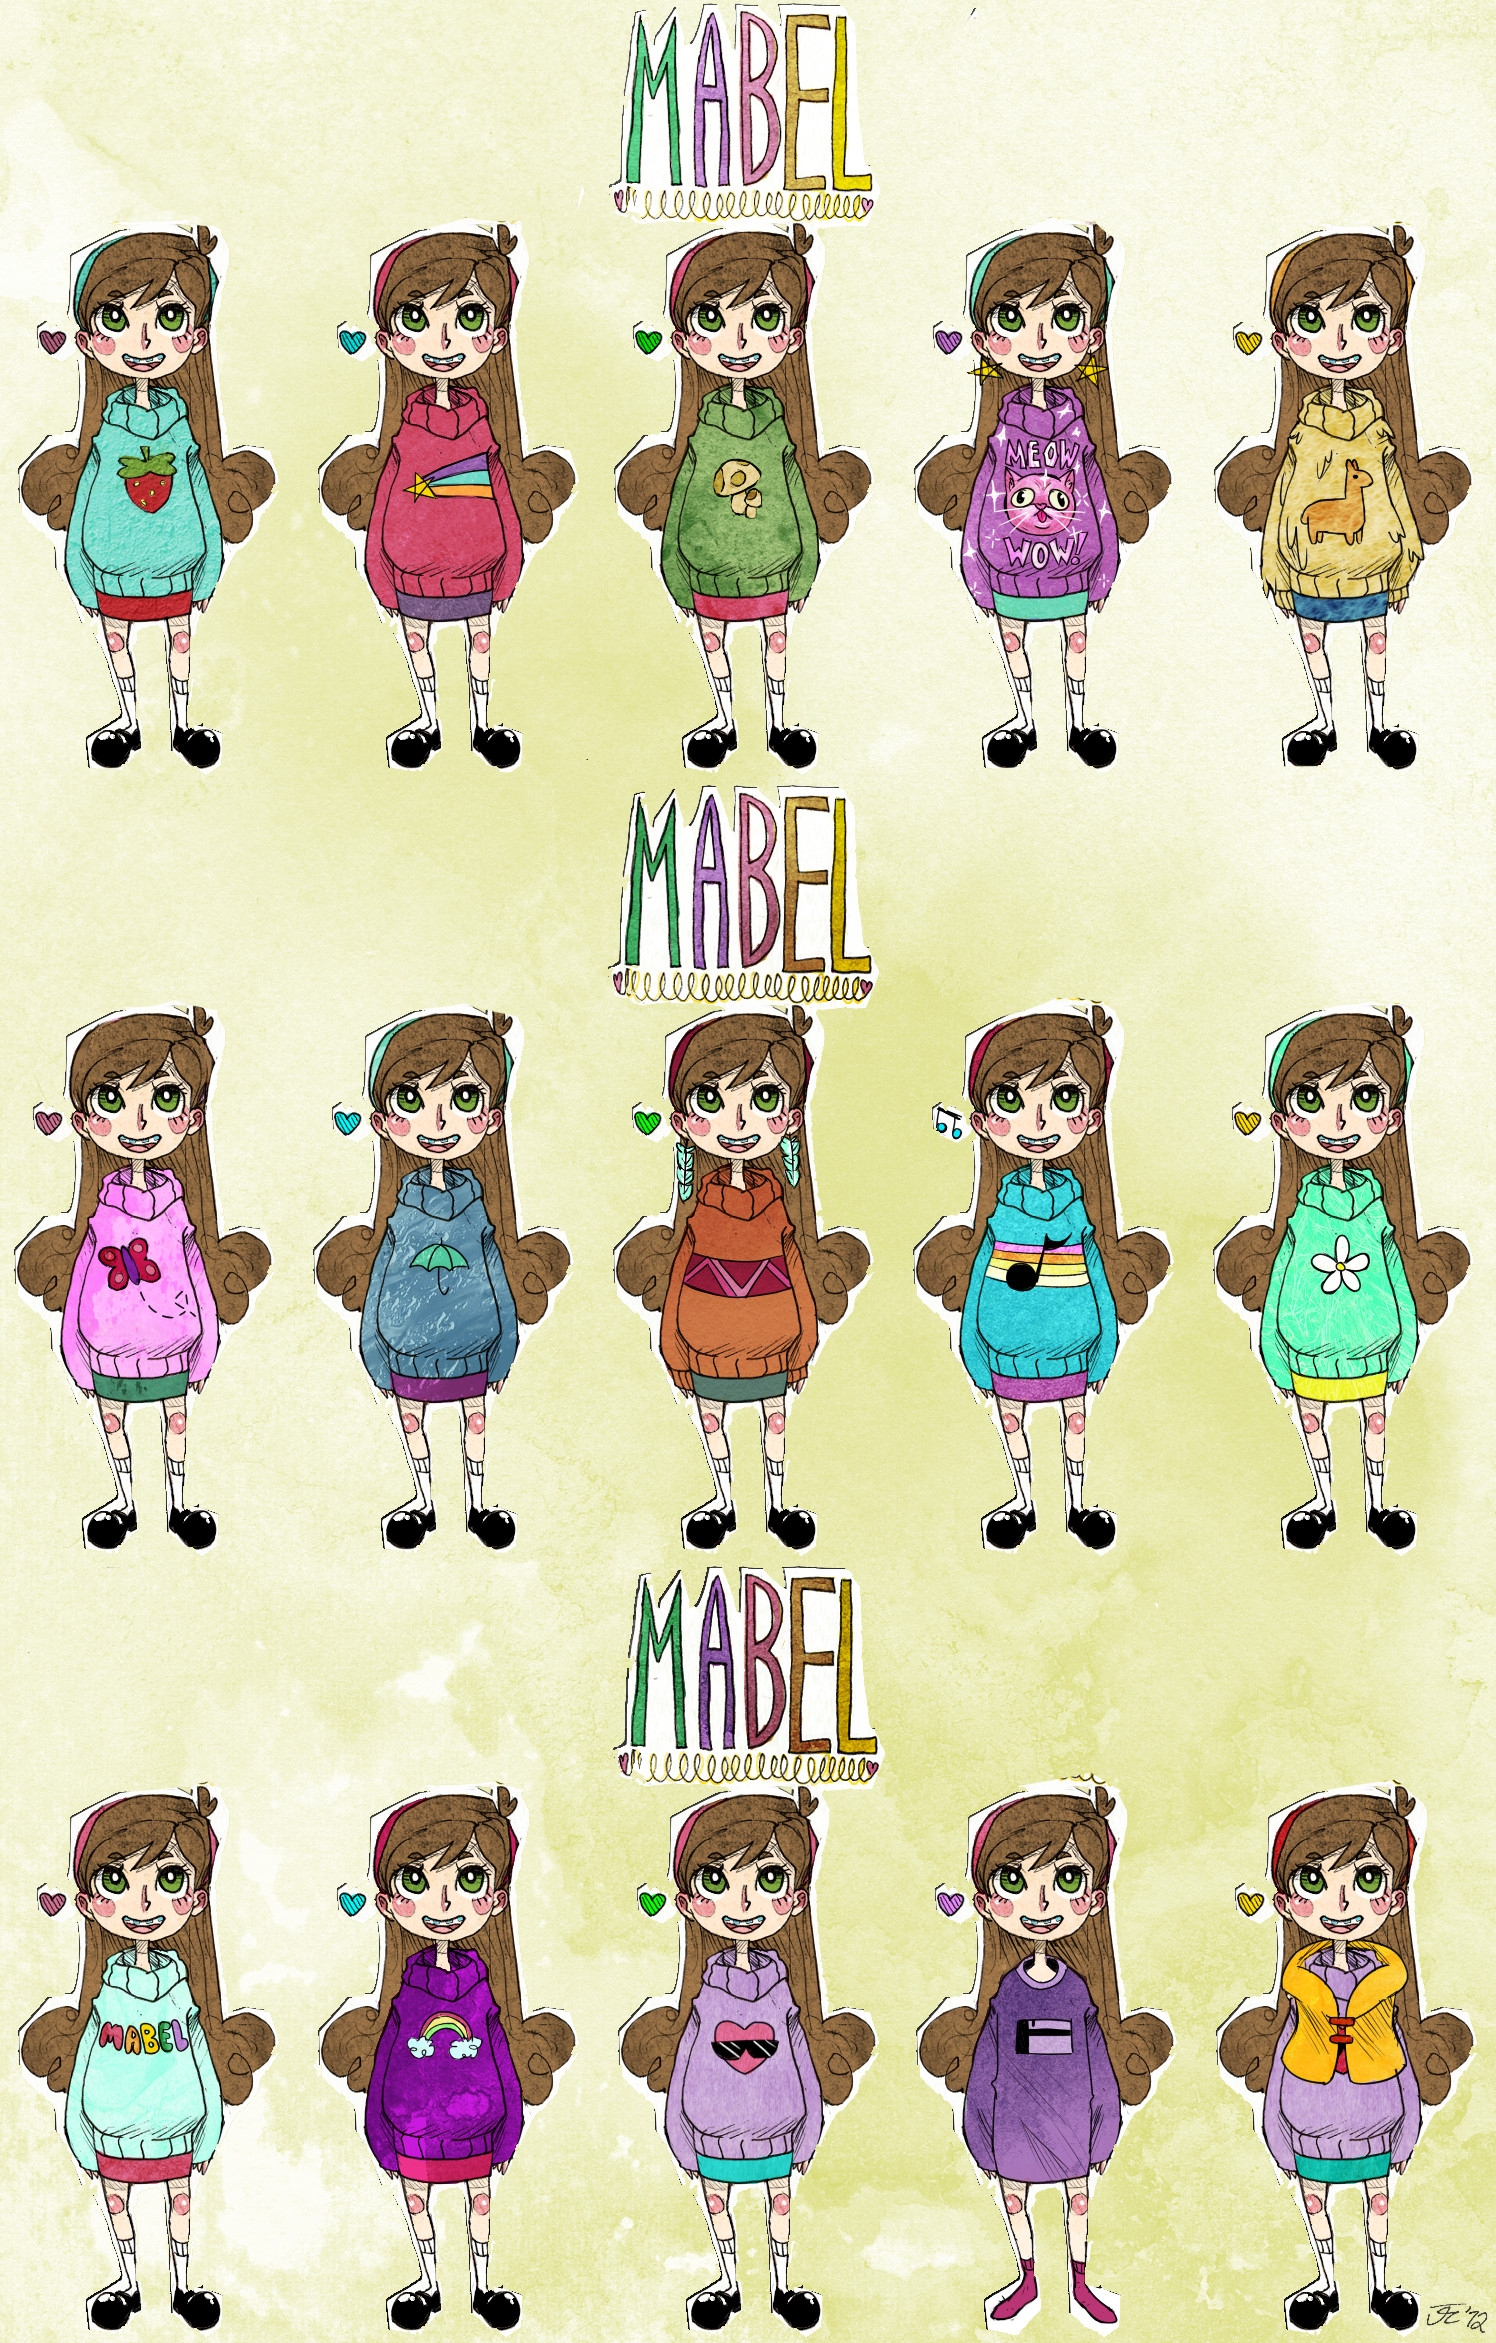 1496x2343 Tags: Anime, Jesscookie, Gravity Falls, Mabel Pines, Floppy Disk, Daisy